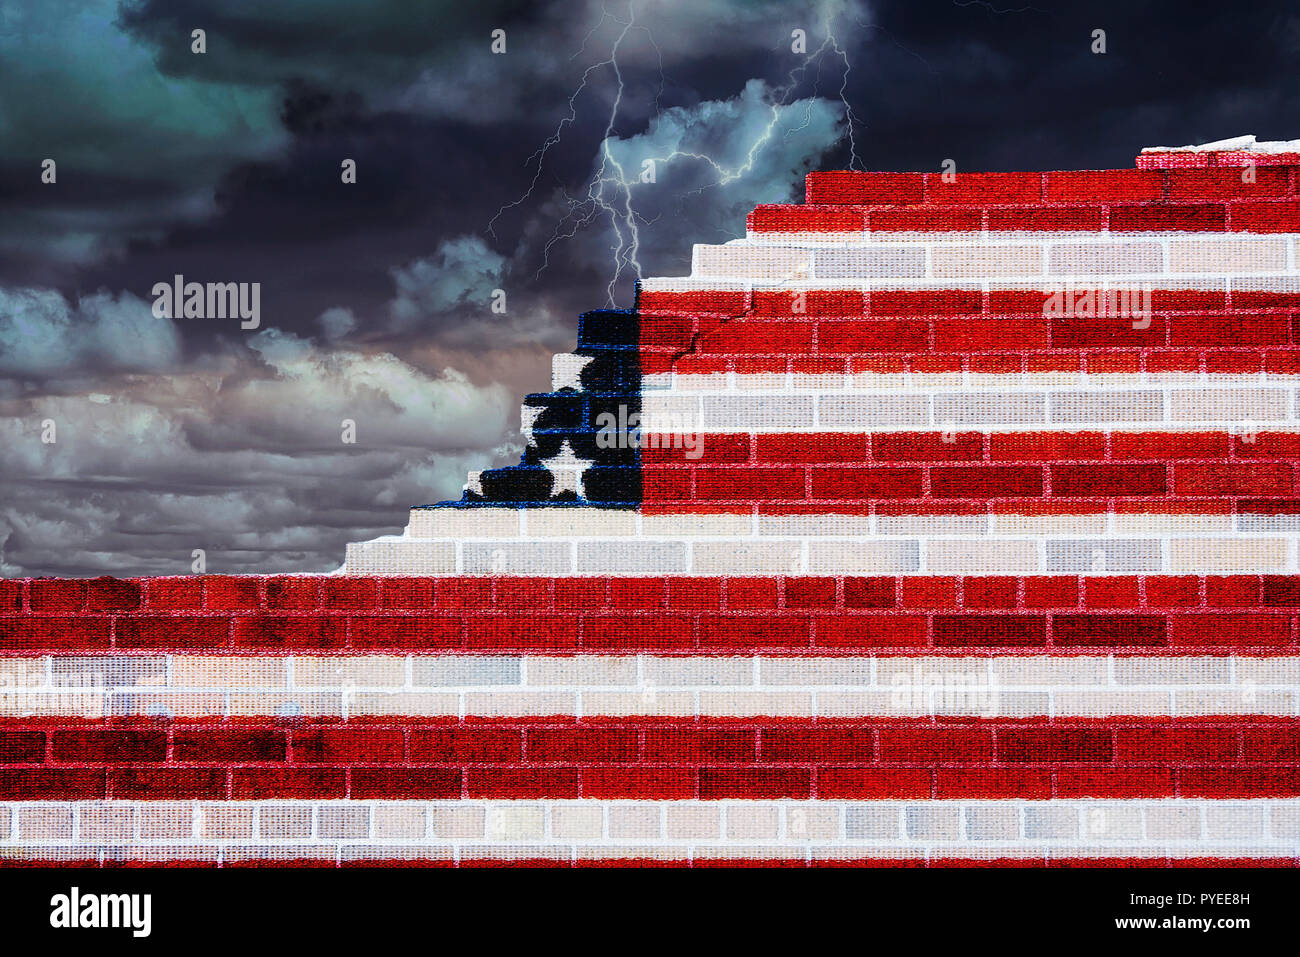 American flag on broken brick wall with stormy sky background Stock Photo